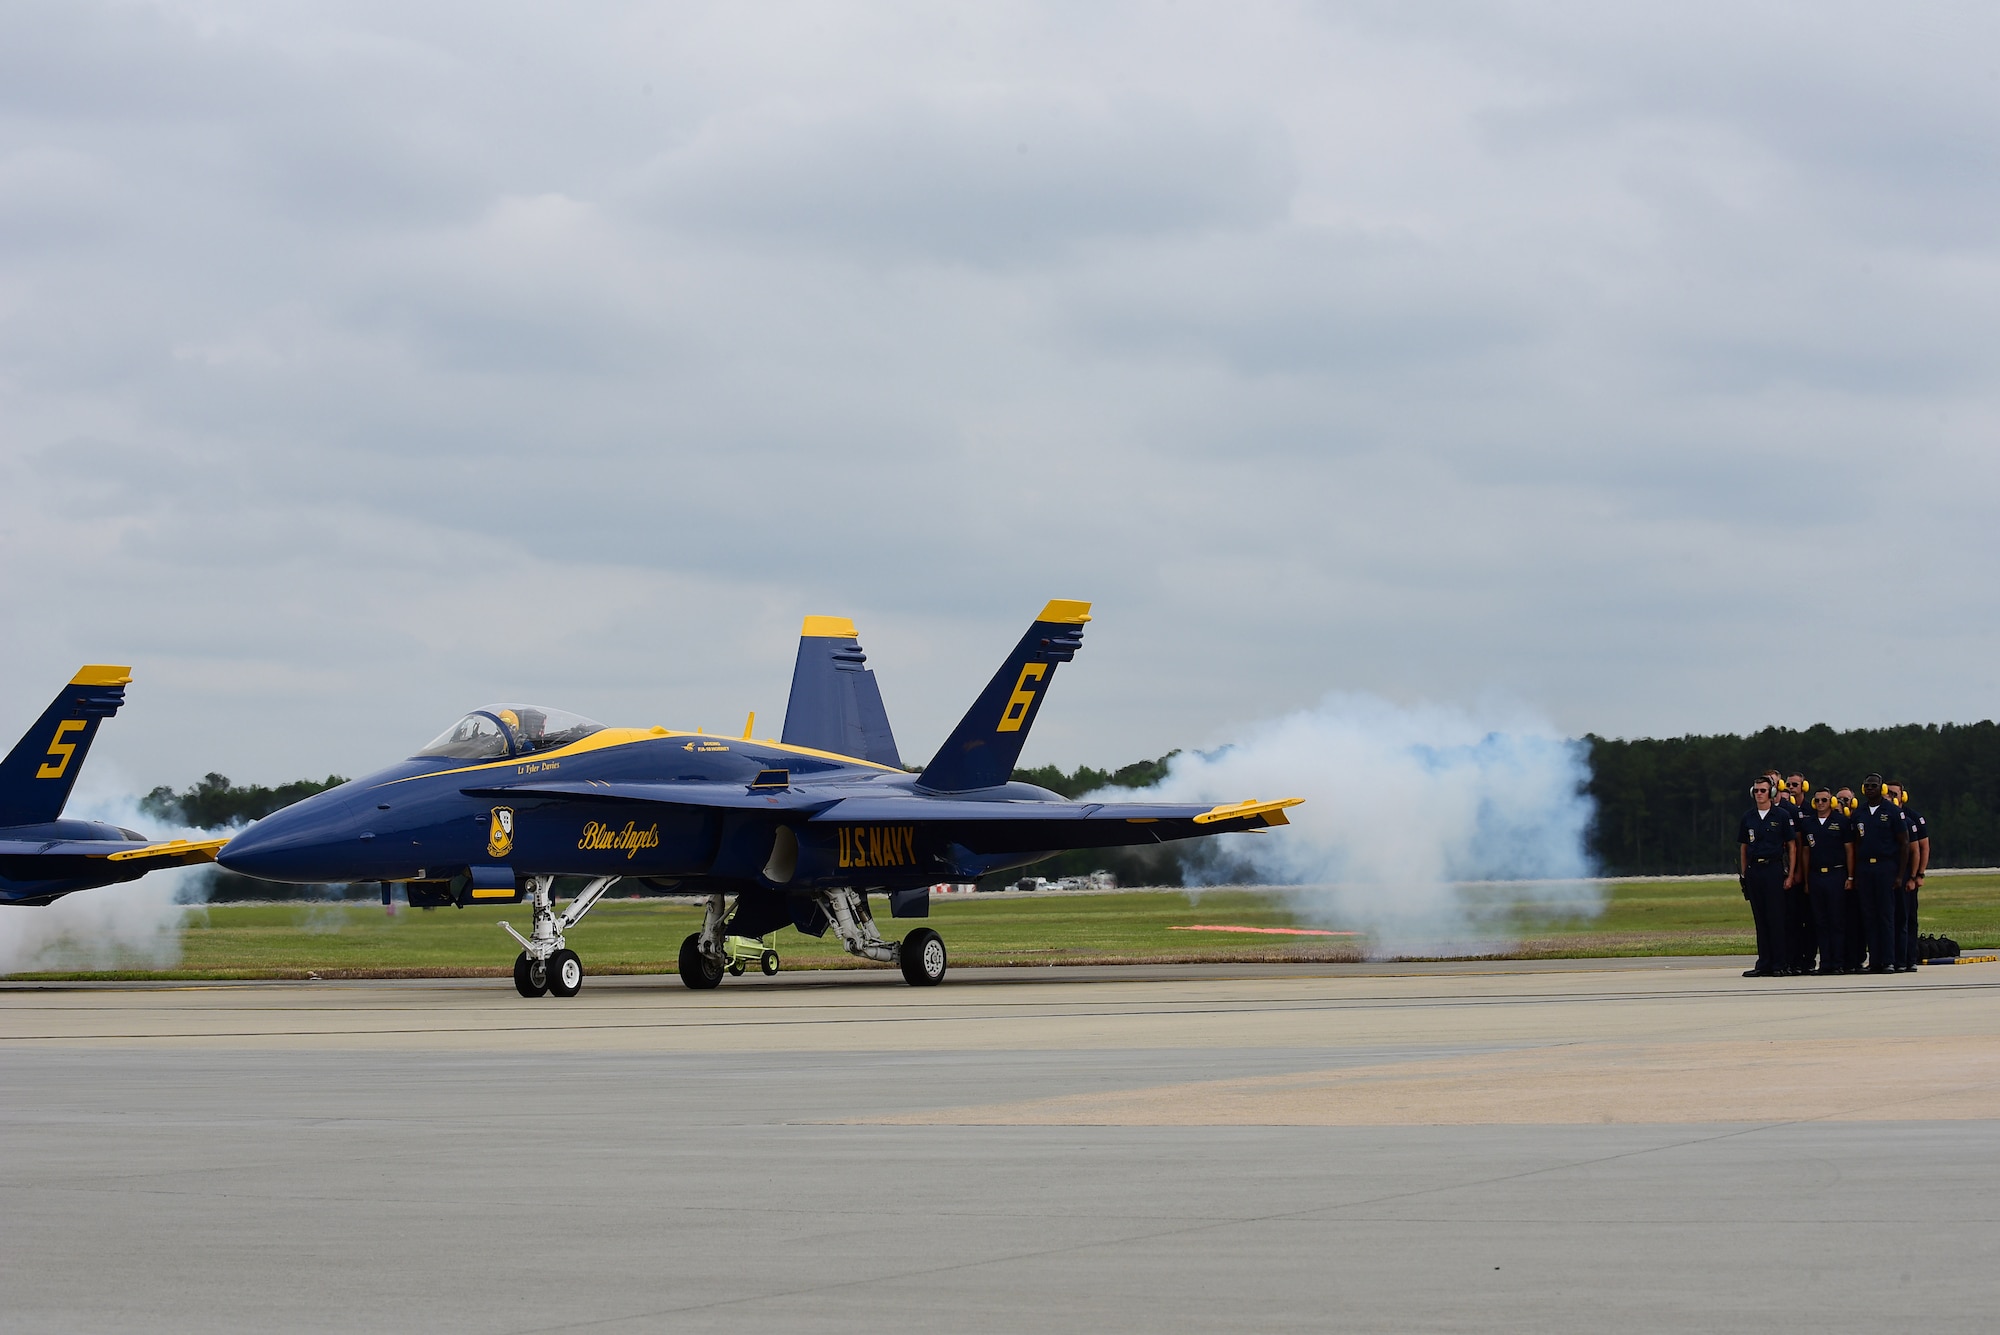 The U.S. Navy Blue Angels prepare to take to the skies over Seymour Johnson Air Force Base, North Carolina, May 21, 2017, during the Wings Over Wayne Air Show. The Blue Angels are the Navy’s premiere aerial demonstration team, led by Commander Ryan J. Bernacchi, the #1 aircraft pilot, flight leader and commanding officer of the 2017 team. (U.S. Air Force photo by Airman 1st Class Kenneth Boyton)